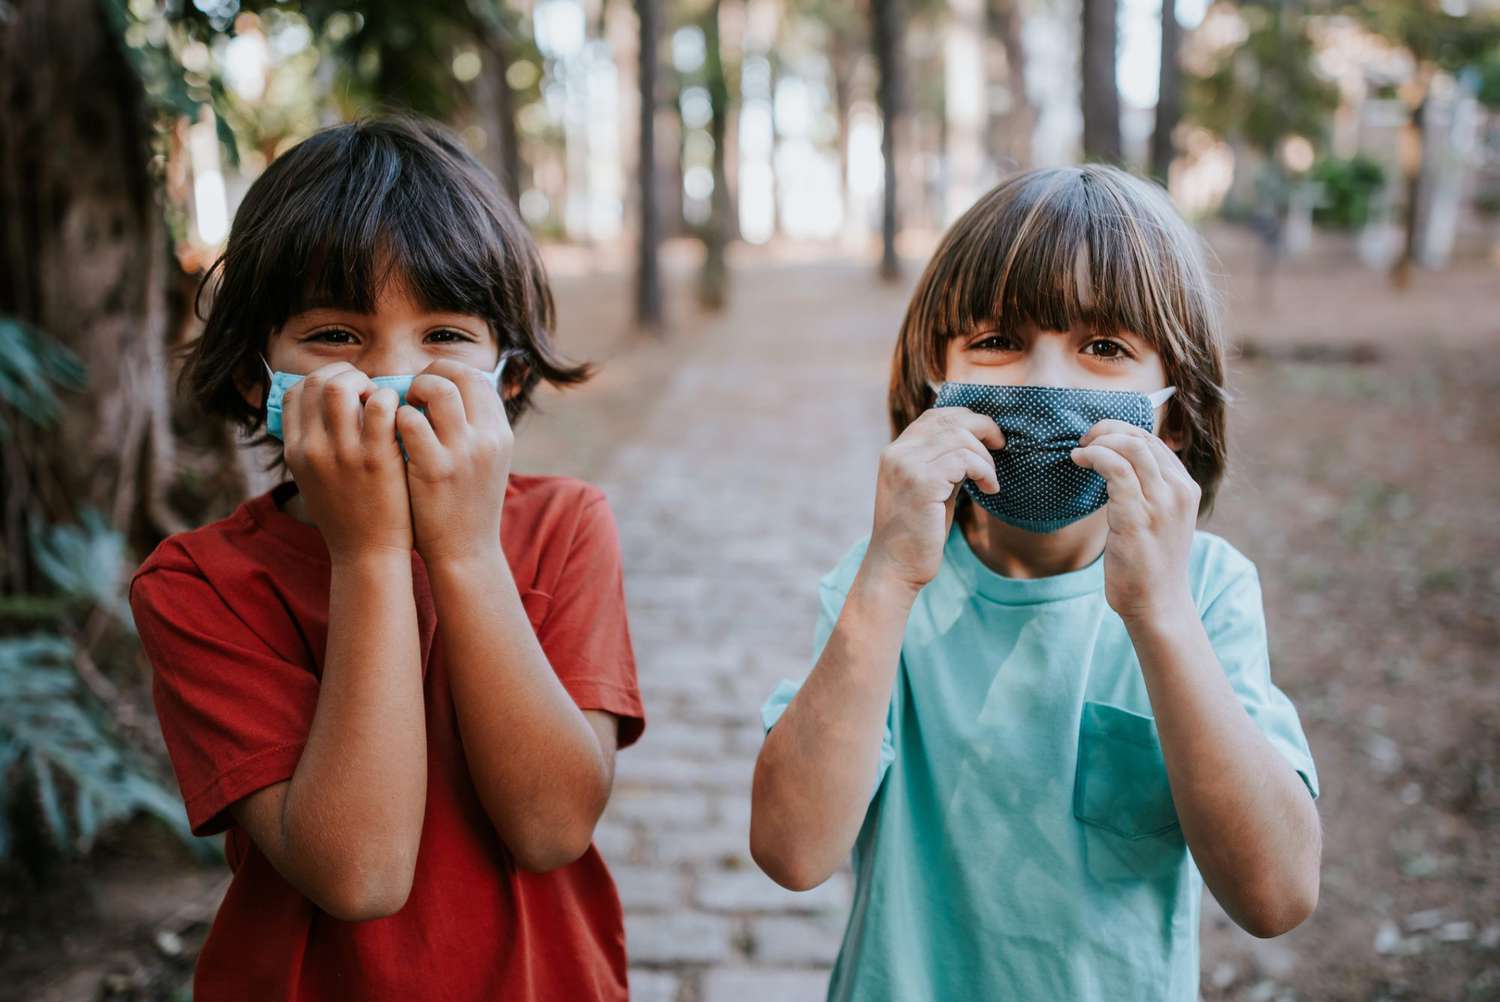 An image of two boys wearing face masks.